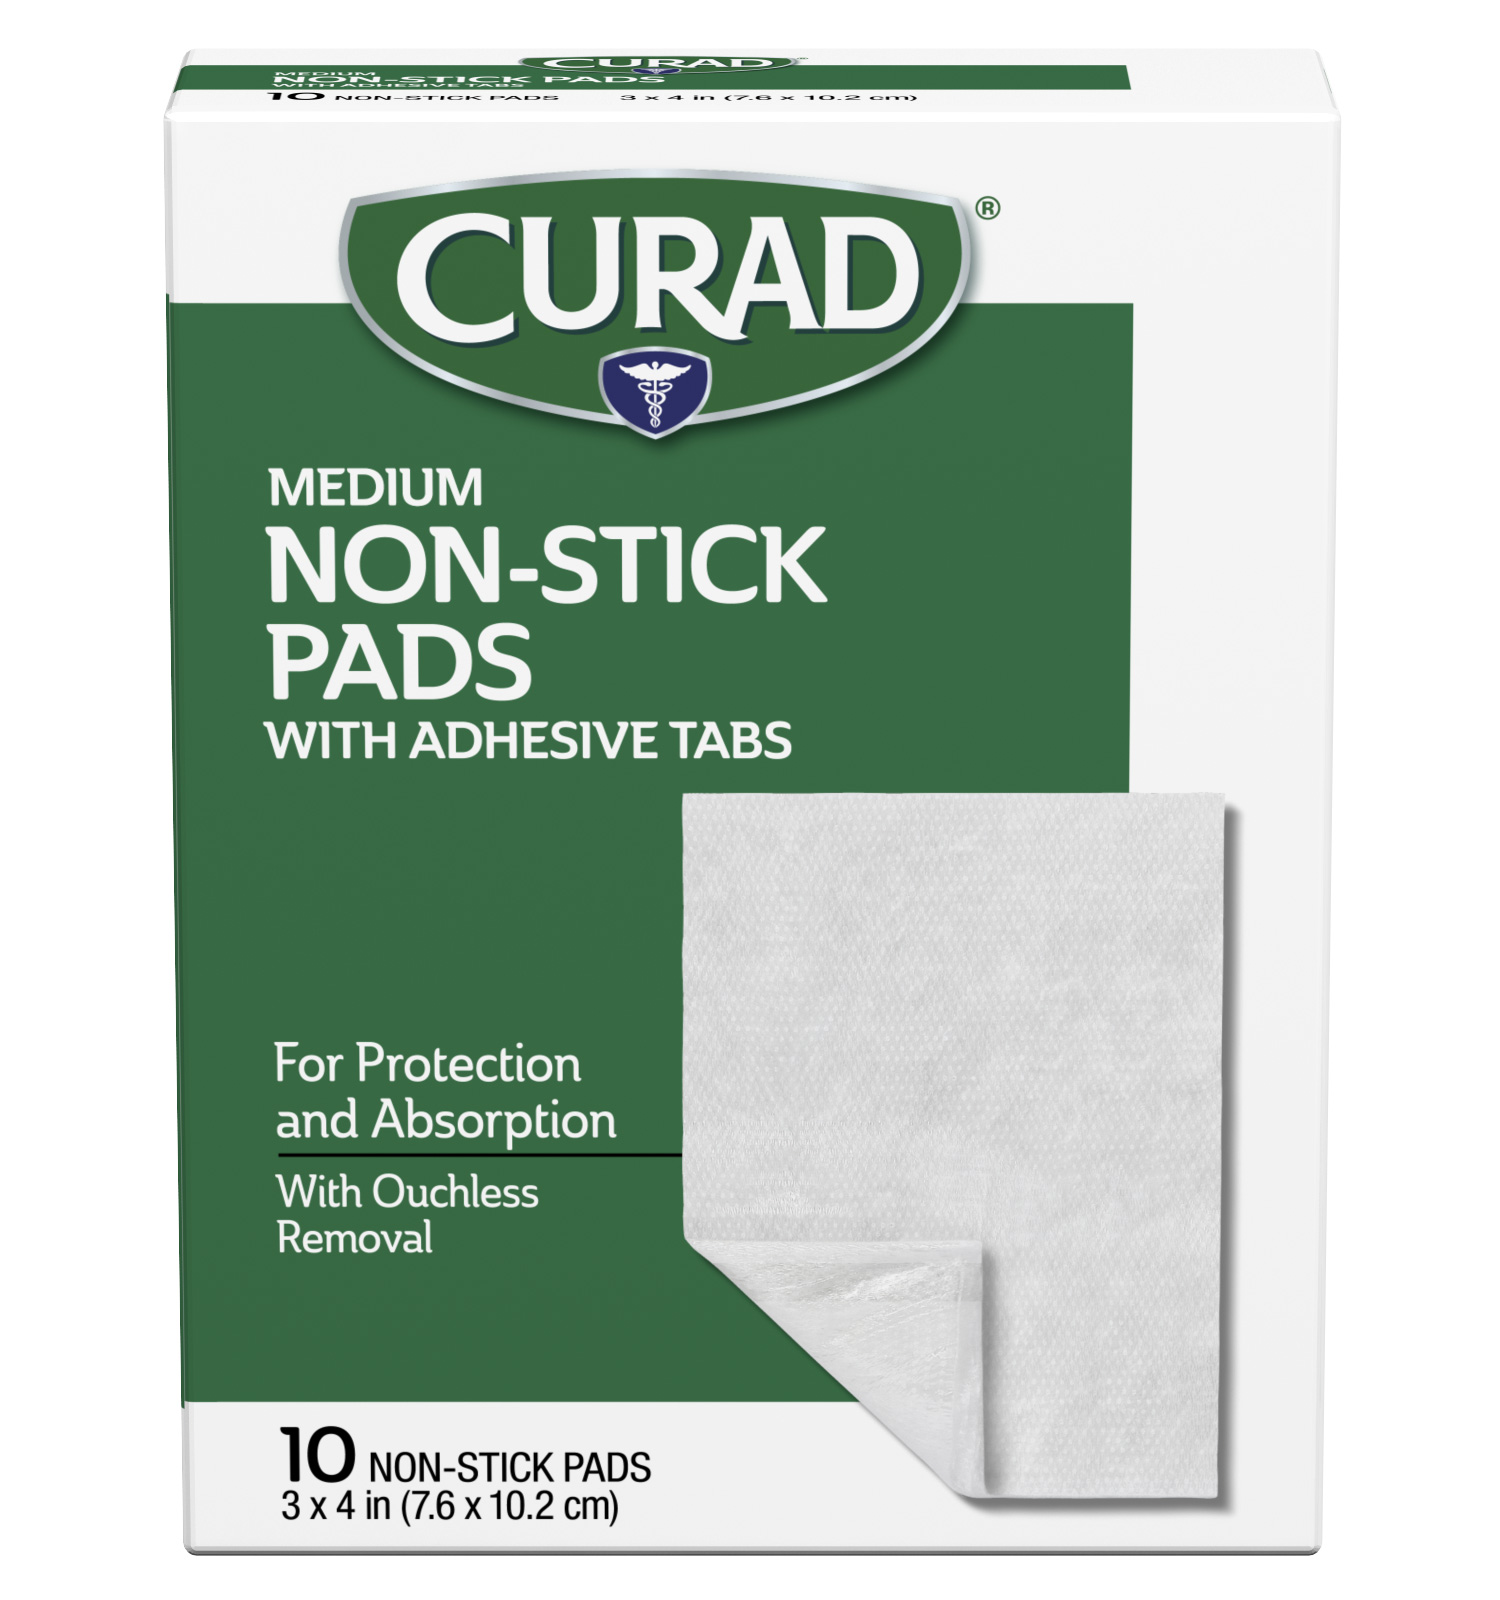 Non-Stick Pads with Adhesive Tabs, 3 x 4, 10 count